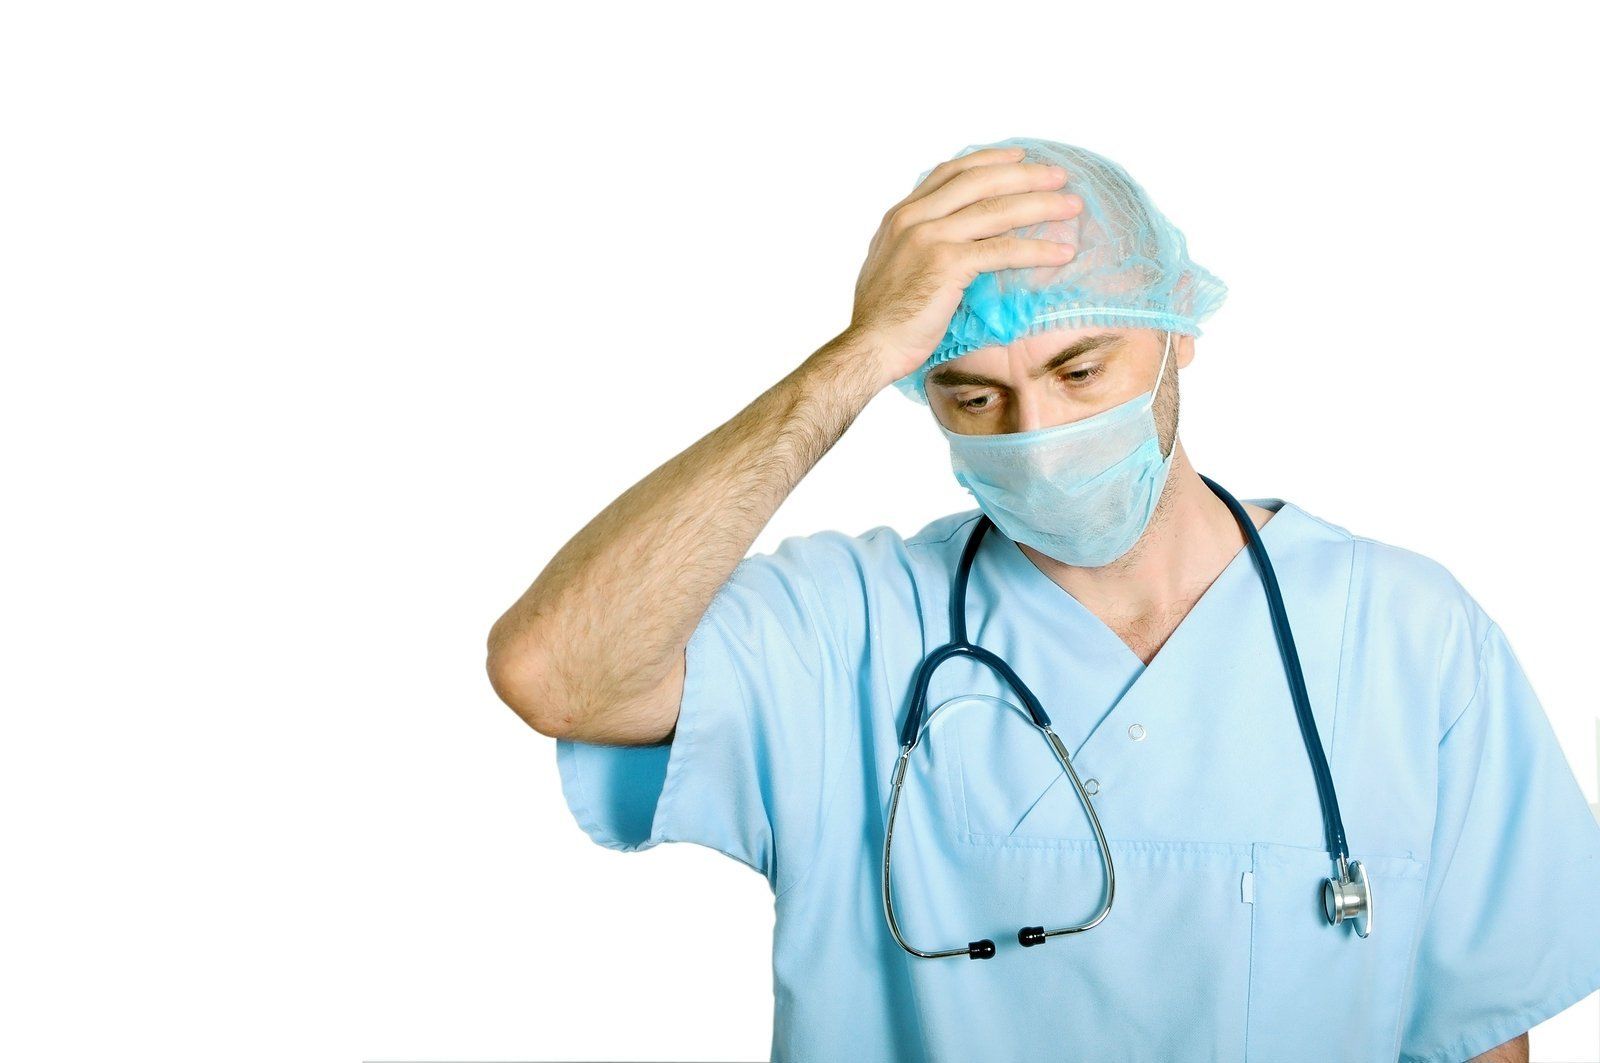 The Director of the CDC denies endorsing N95 masks for health-care workers 2